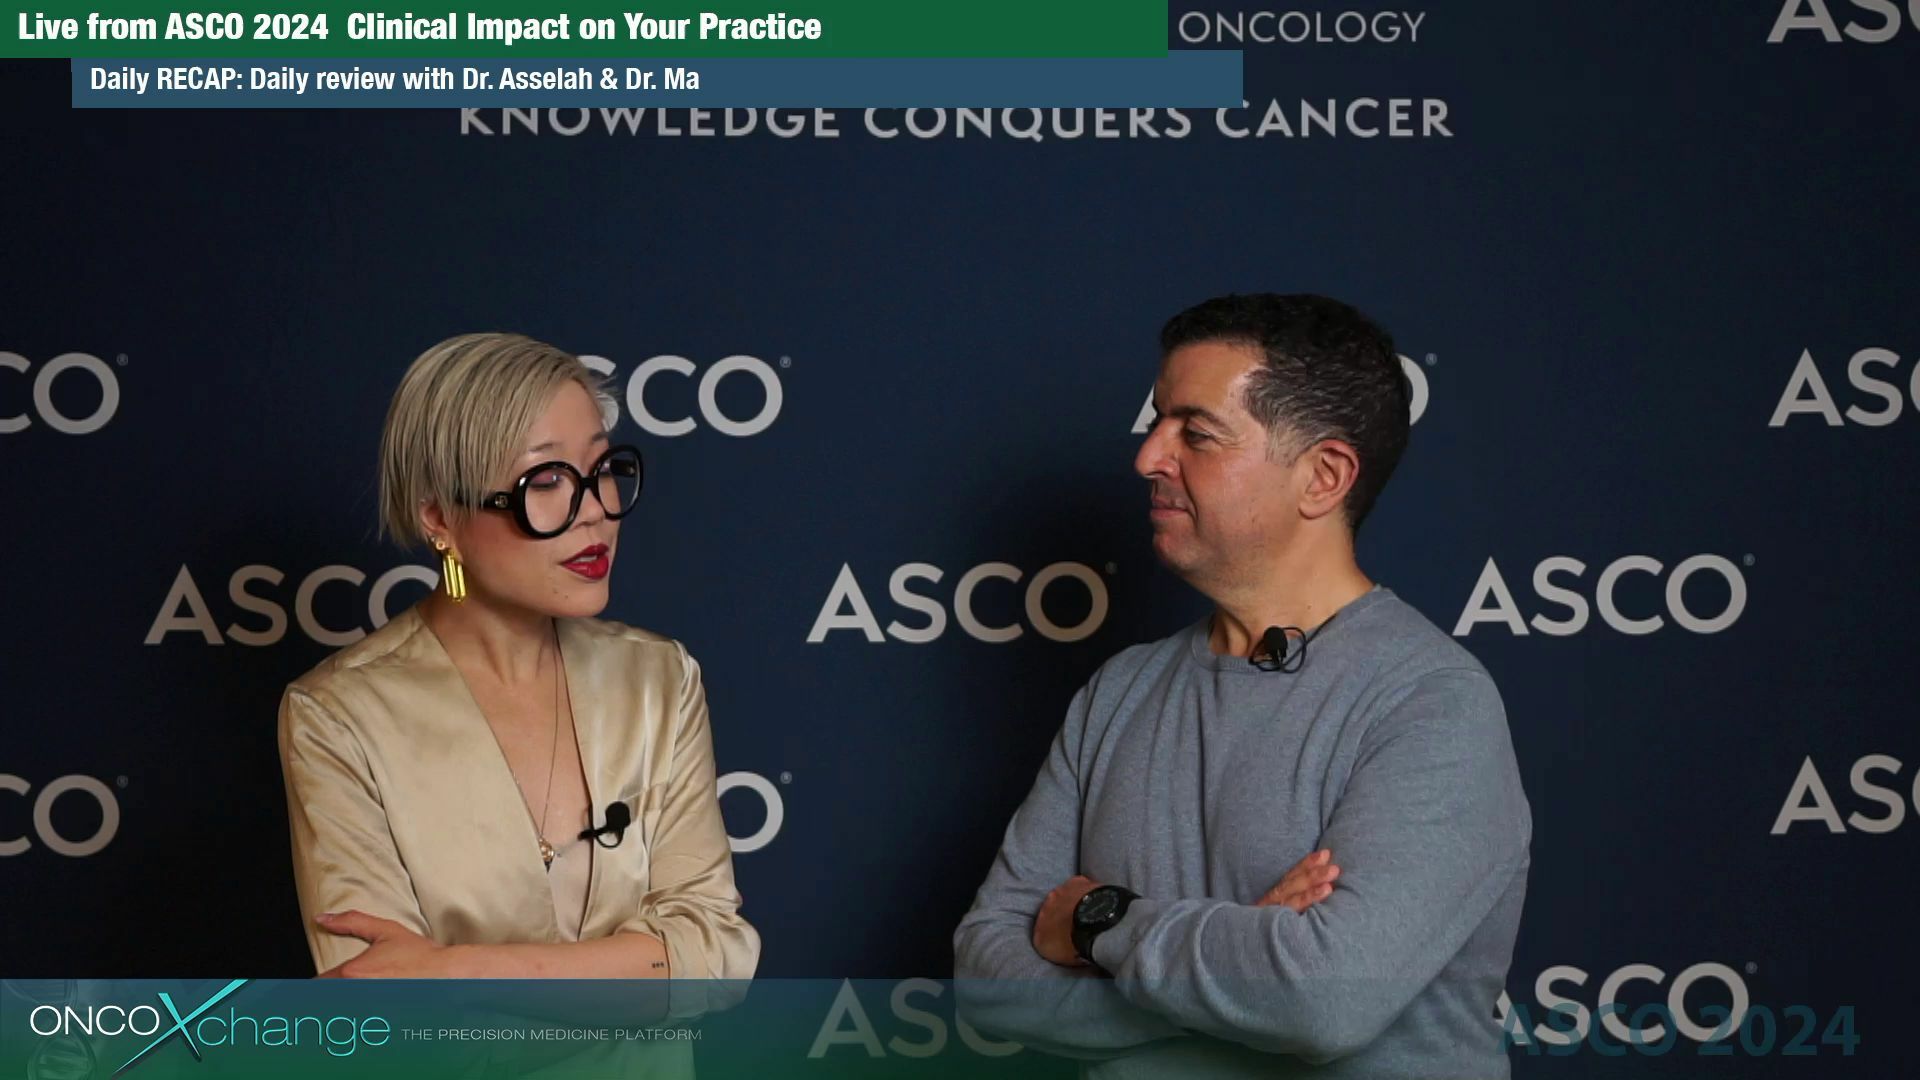 ASCO 2024: Daily RECAP day 1 with Drs. Asselah and Ma